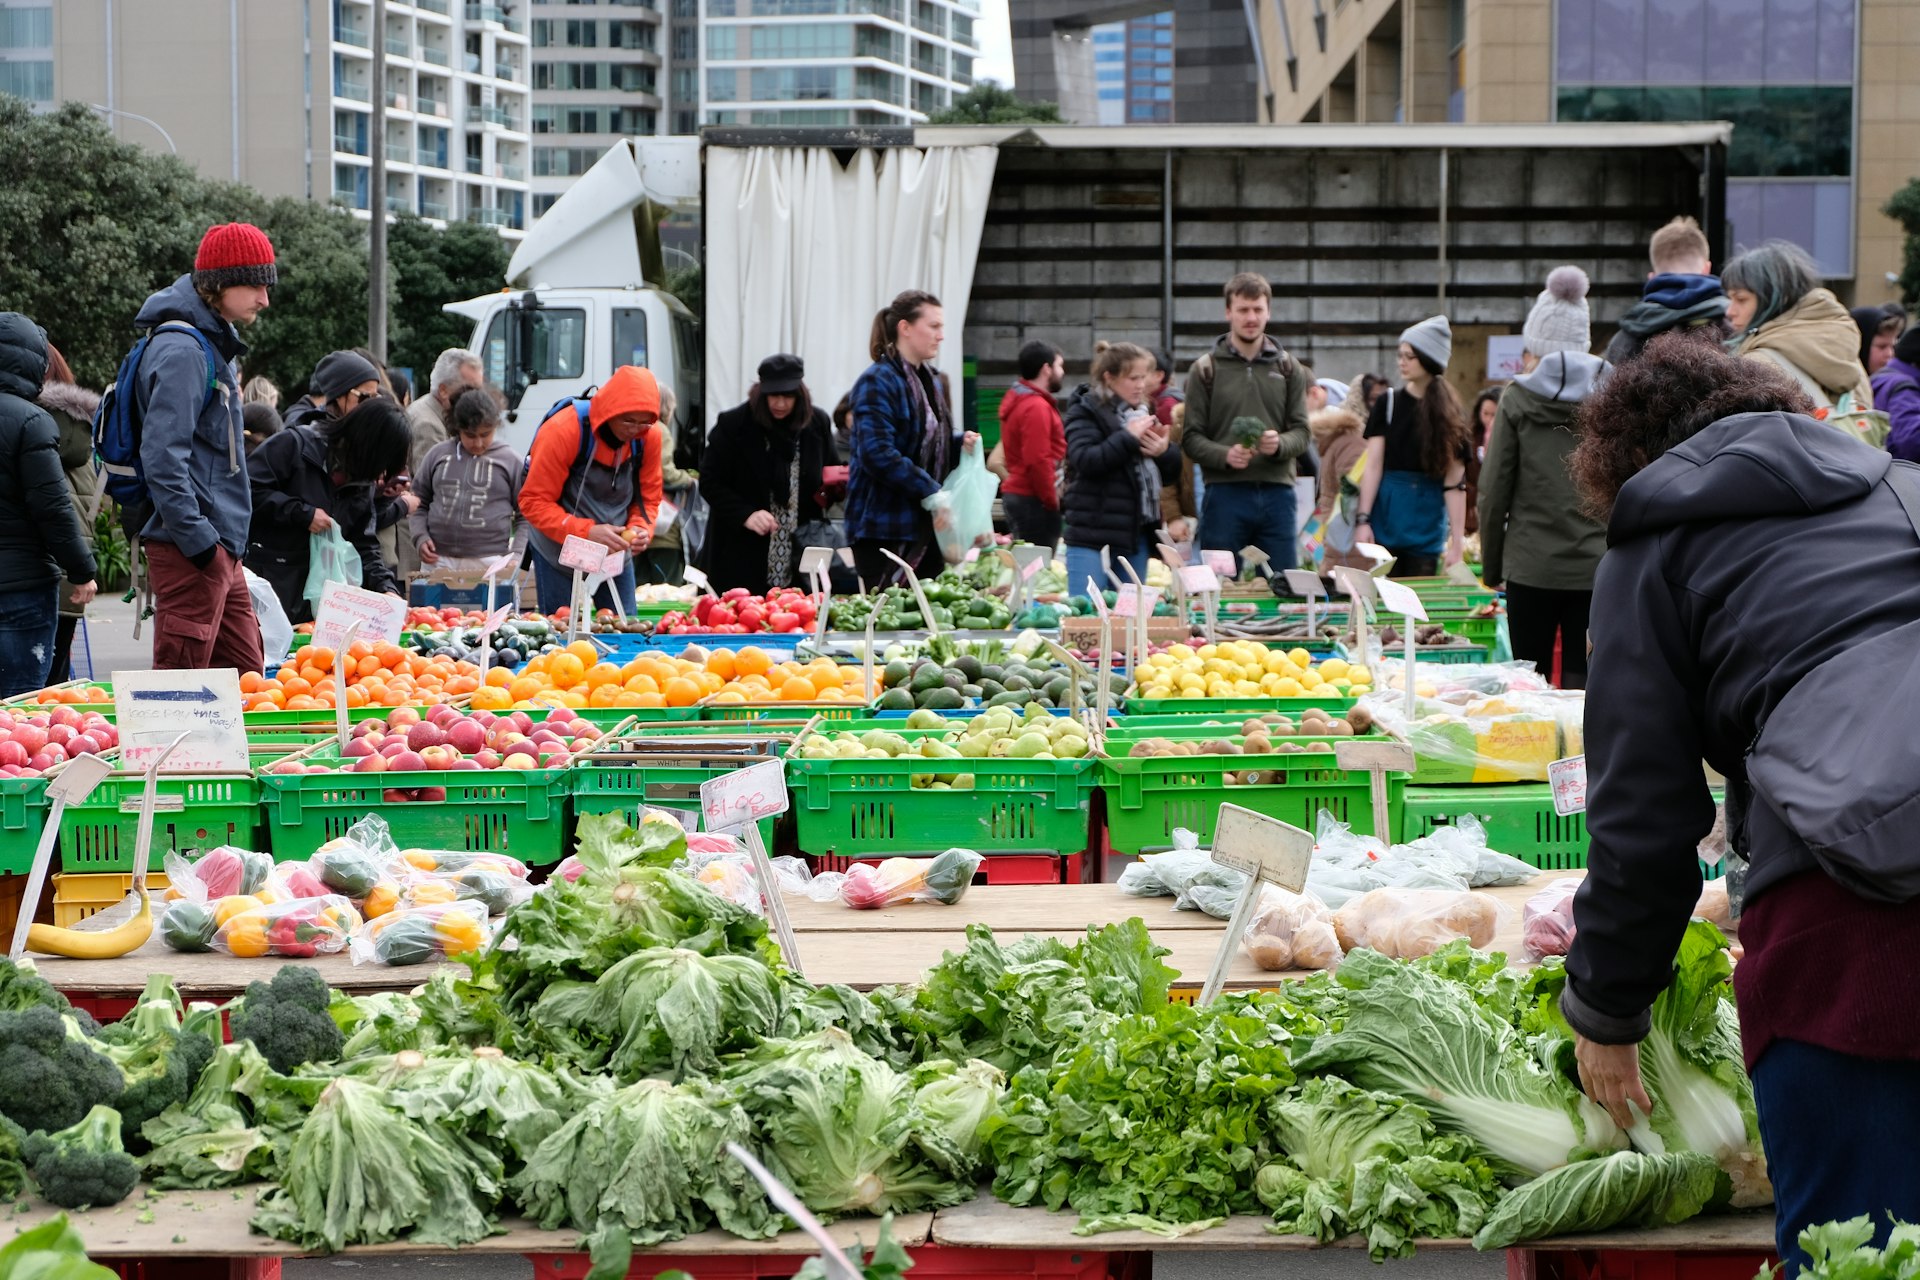 People shopping for groceries at the weekend fruit and vegetable market in the capital city of Wellington, NZ Aotearoa